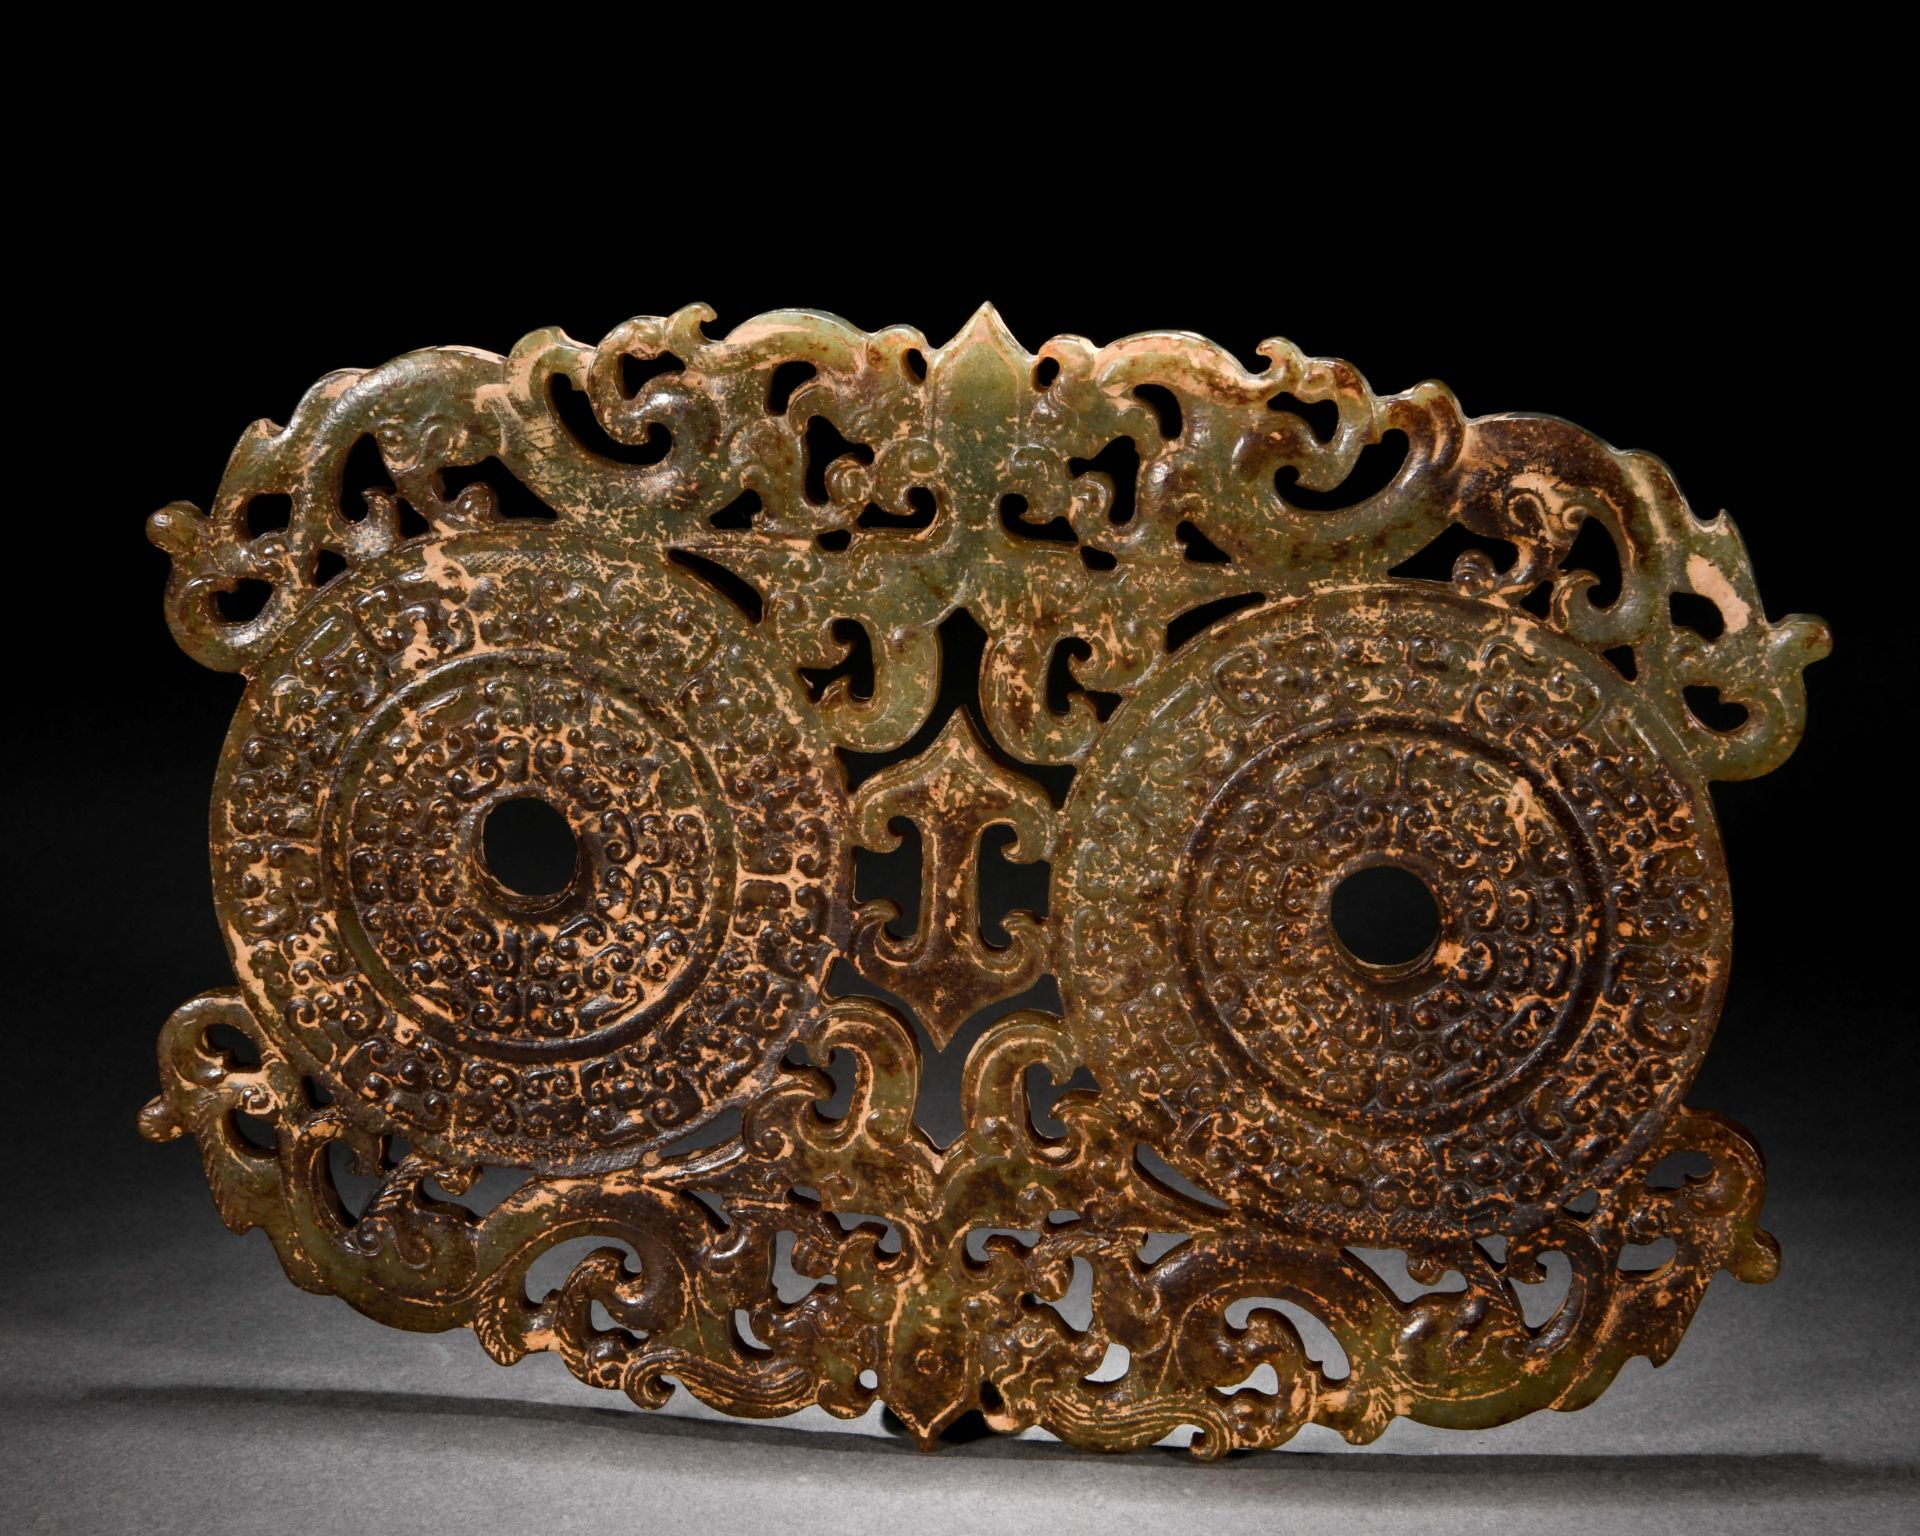 A Chinese Carved Jade DIsc Ornament - Image 6 of 7